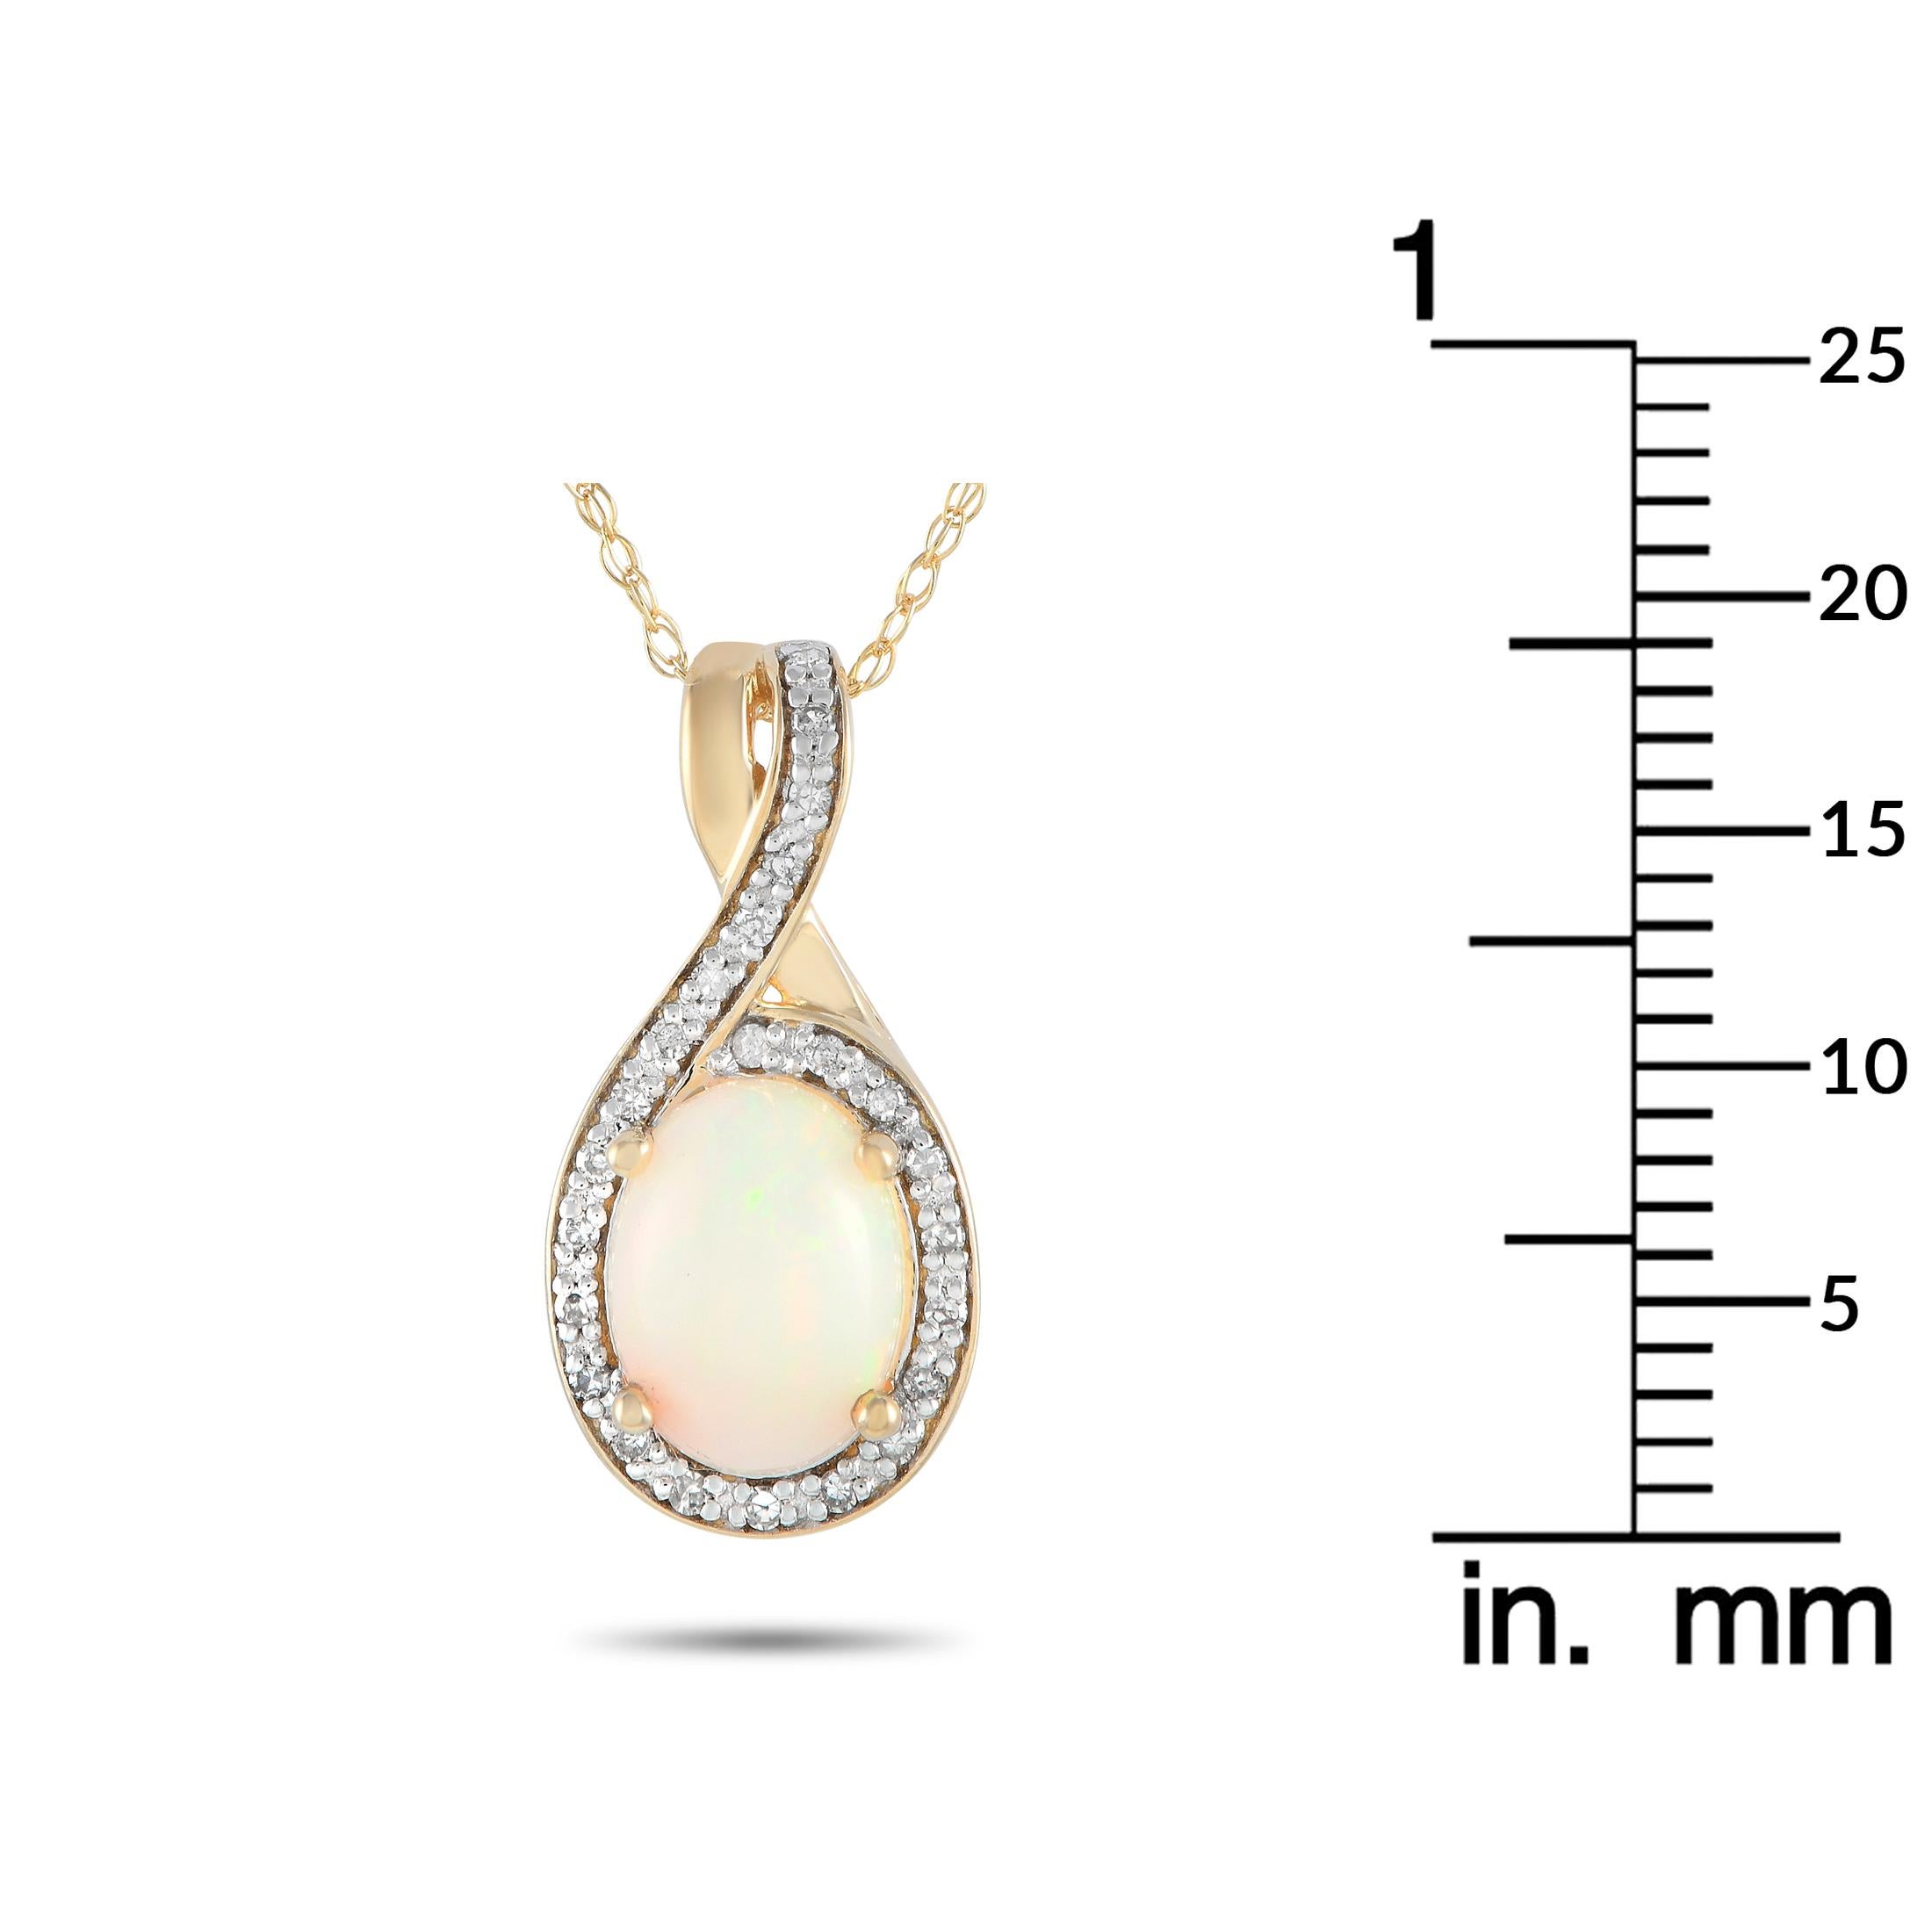 LB Exclusive 14K Yellow Gold 0.11ct Diamond & Opal Pendant Necklace PD4-16268YOP In New Condition For Sale In Southampton, PA